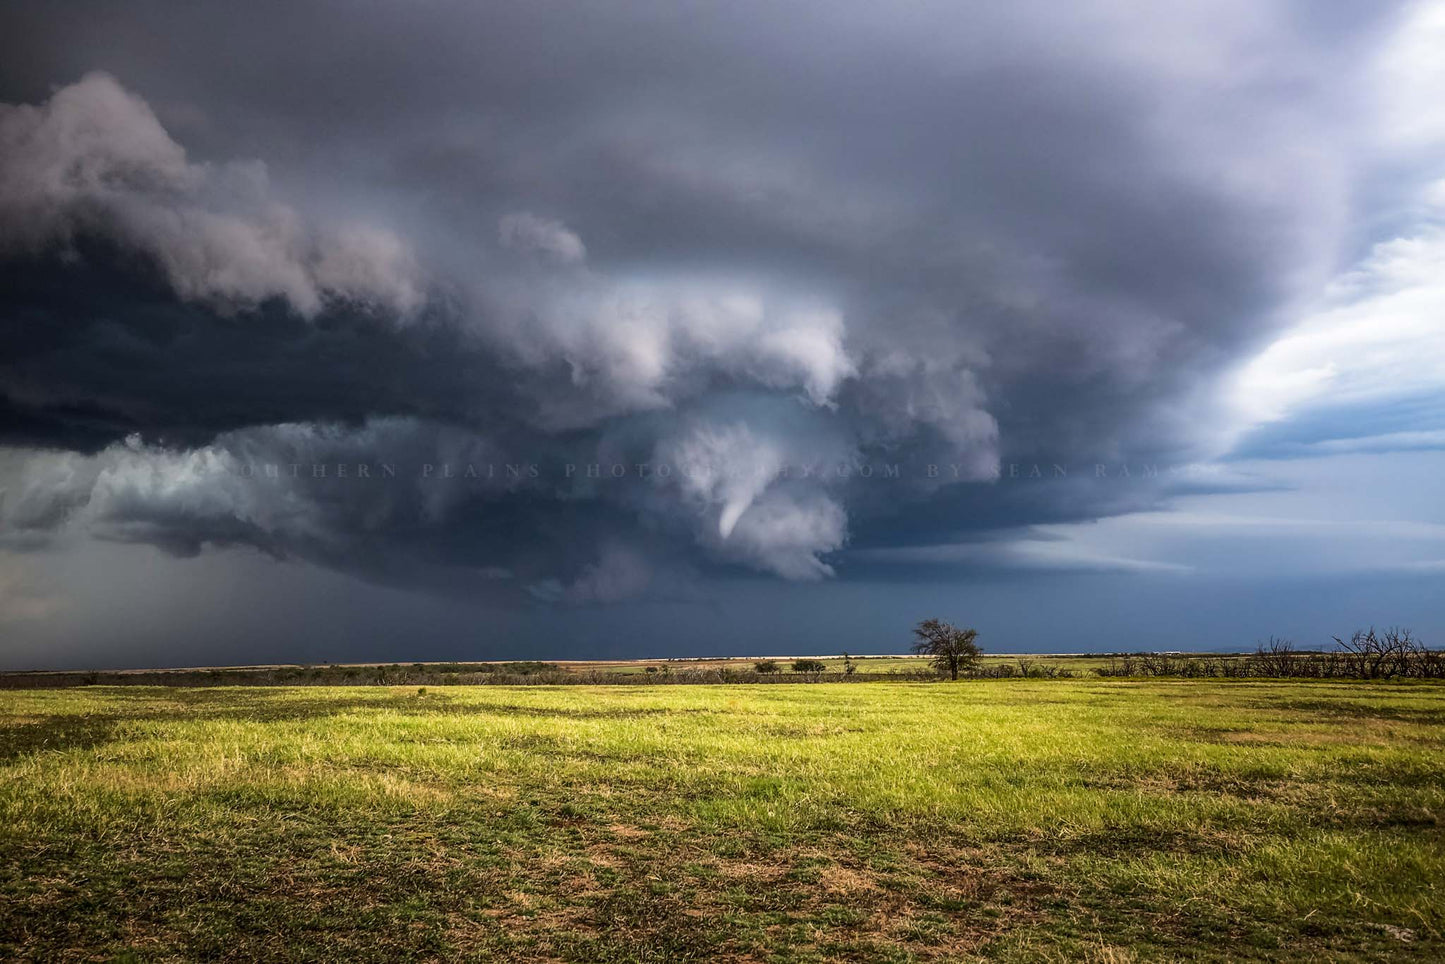 Storm photography print of a thunderstorm on the verge of producing a tornado as a funnel cloud forms within a mesocyclone on a stormy day in Oklahoma by Sean Ramsey of Southern Plains Photography.